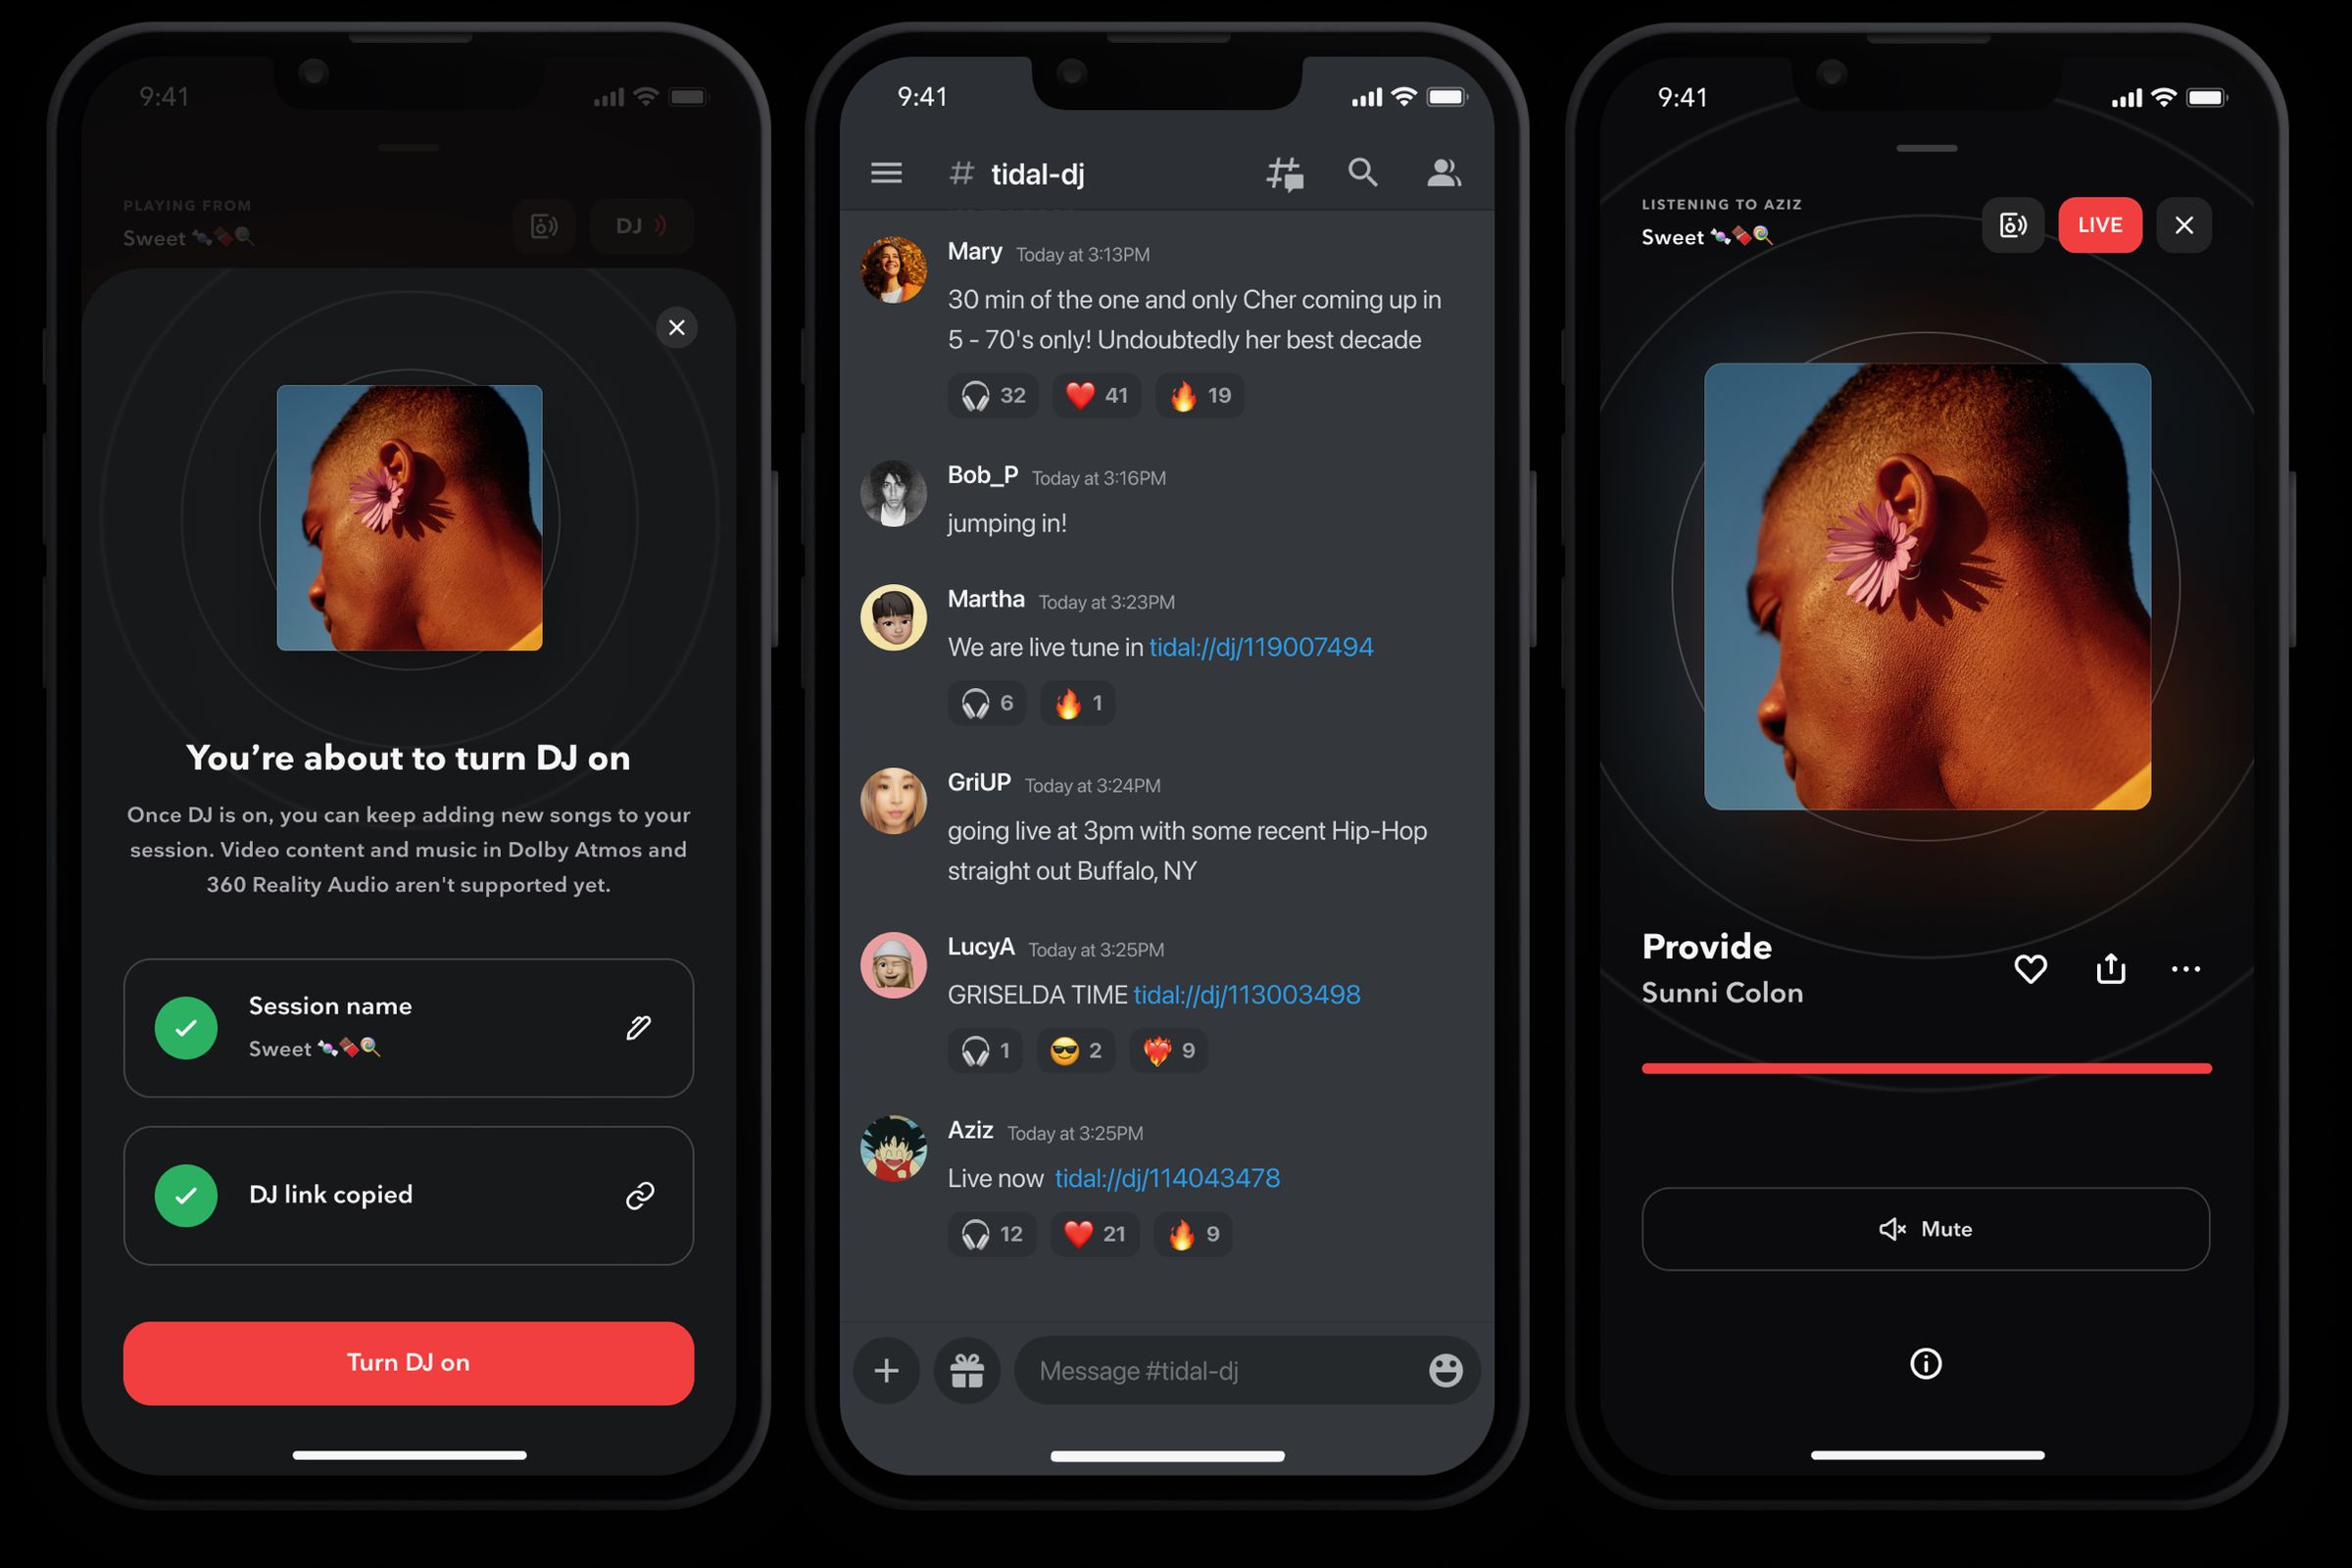 Start by tapping the DJ button, name the session, and then share out the link to people (in this case through Discord). Tidal paid subscribers who open the link can then stream on their mobile device.